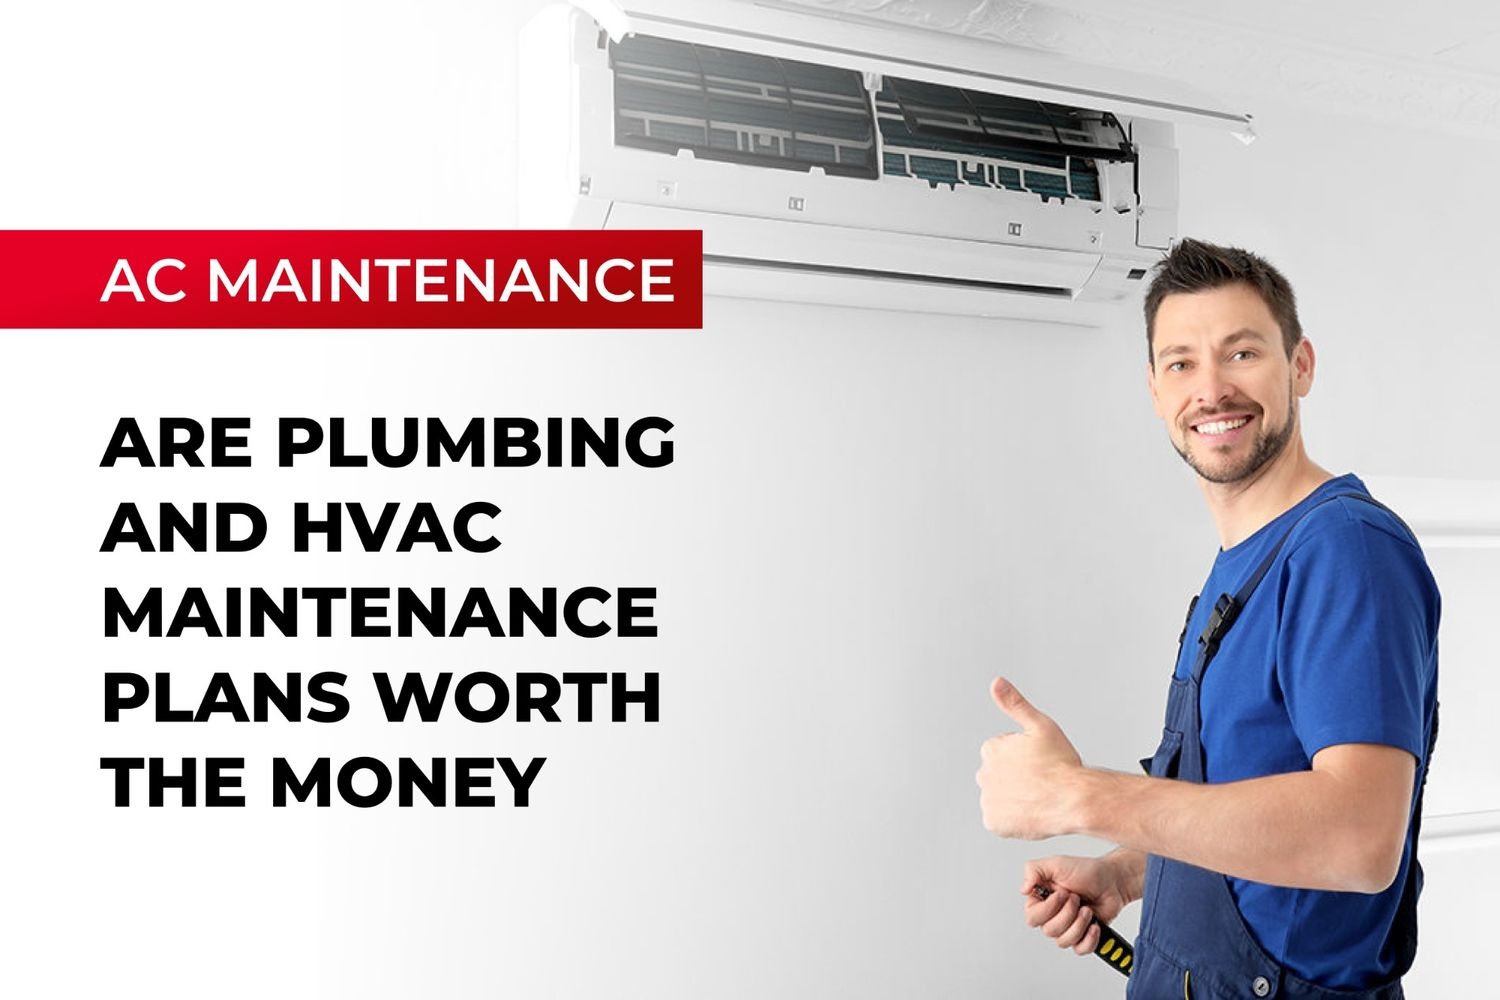 Are Plumbing and HVAC Maintenance Plans Worth The Money?